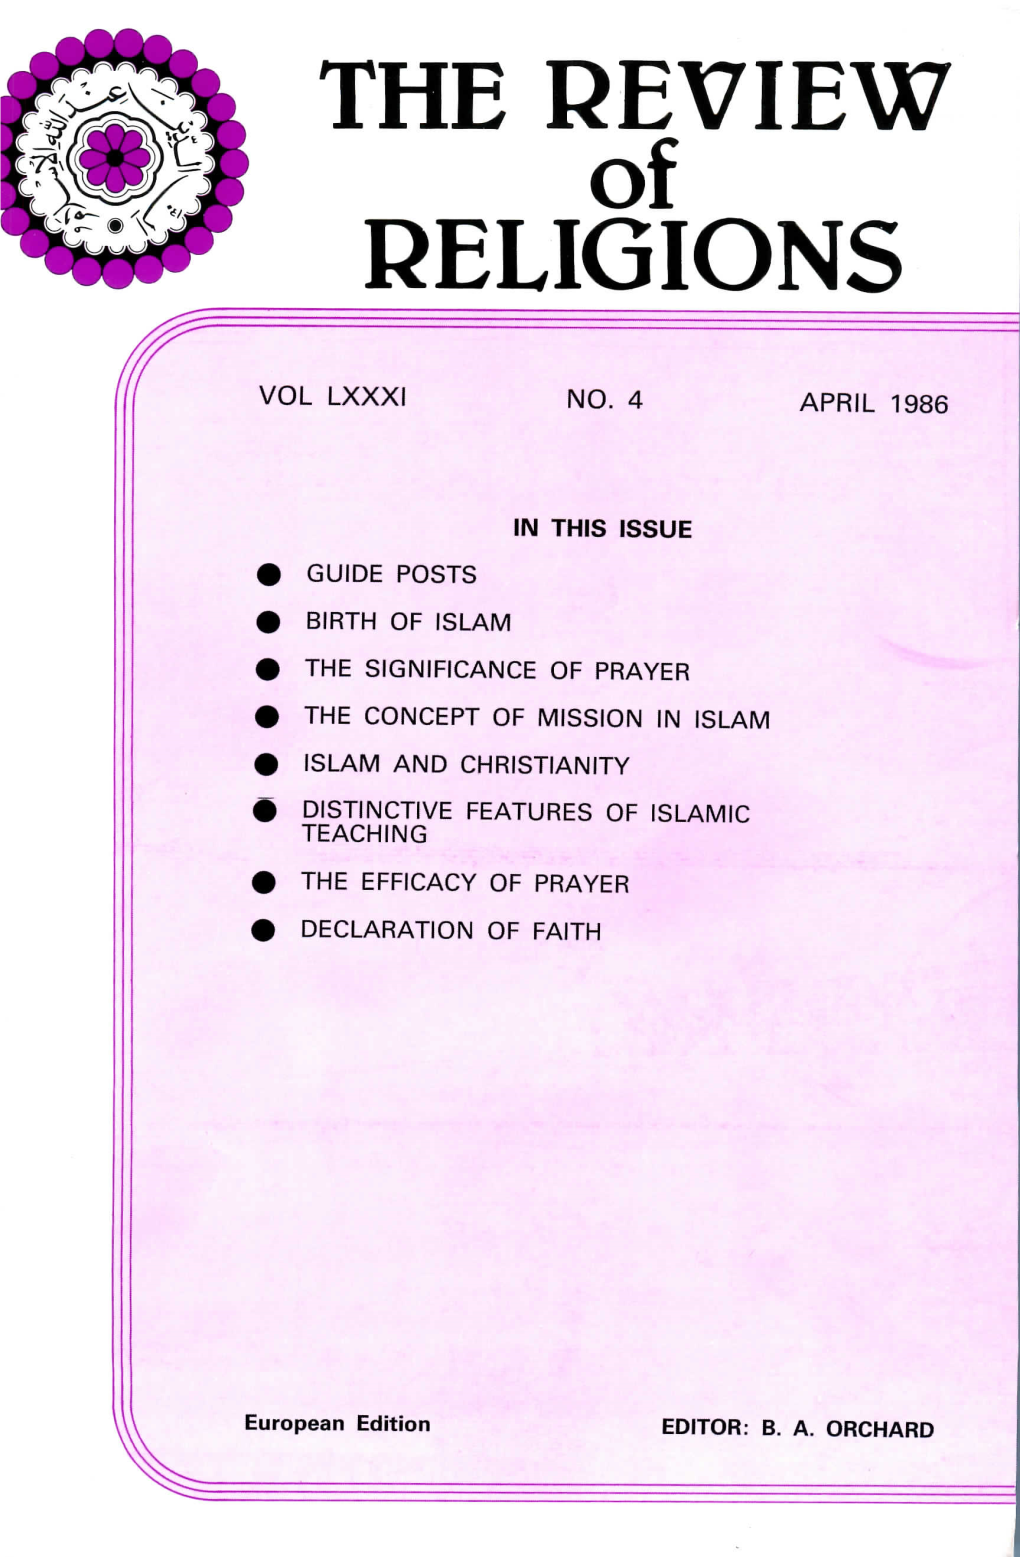 THE REVIEW of RELIGIONS